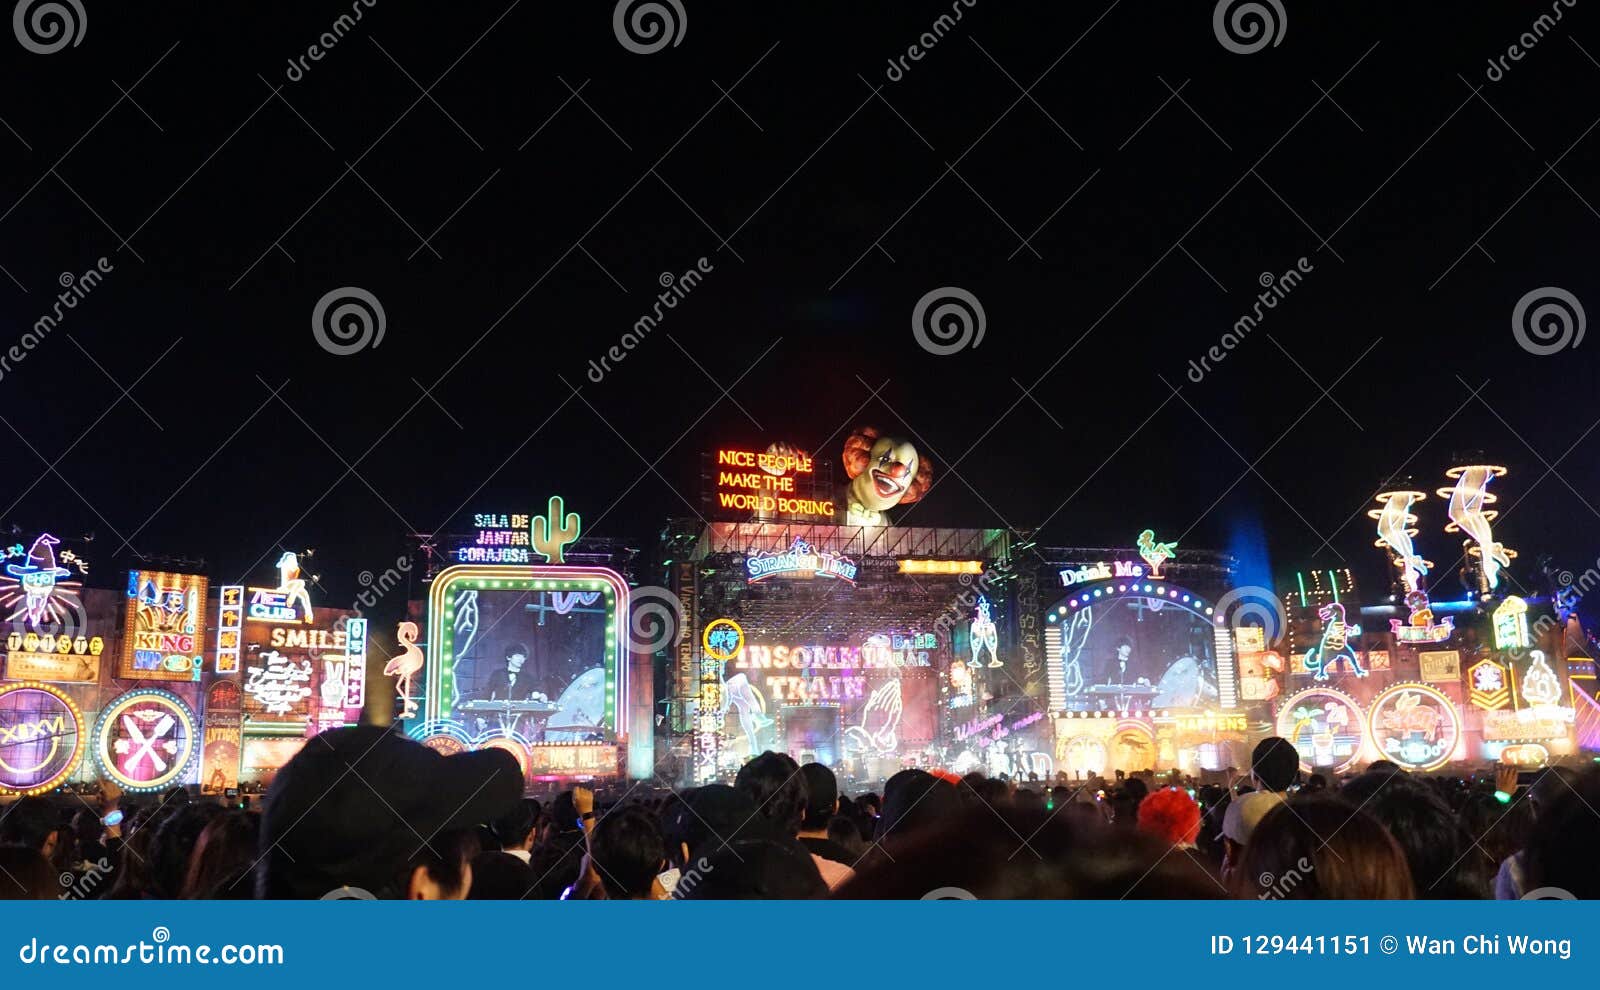 Supreme Outdoor Neon Stage In Sekai No Owari Concert Insomnia Train Editorial Photo Image Of Famous Coloured